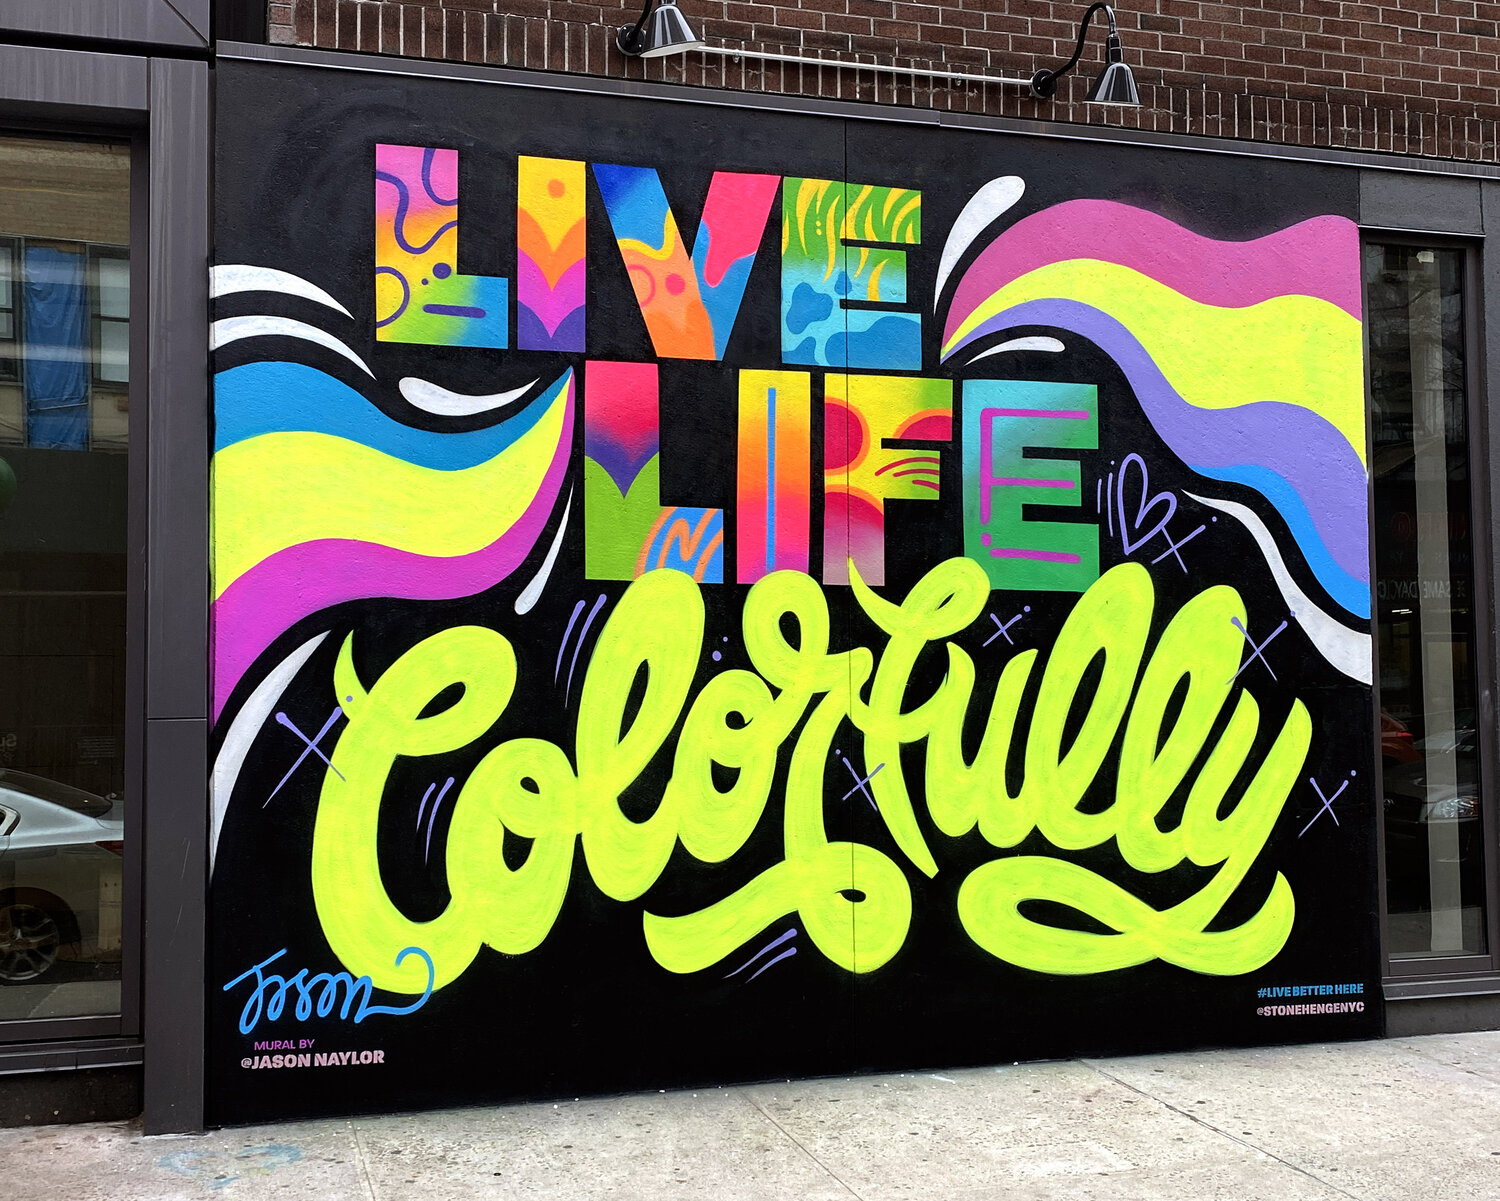 Live Life Colorfully by Jason Naylor